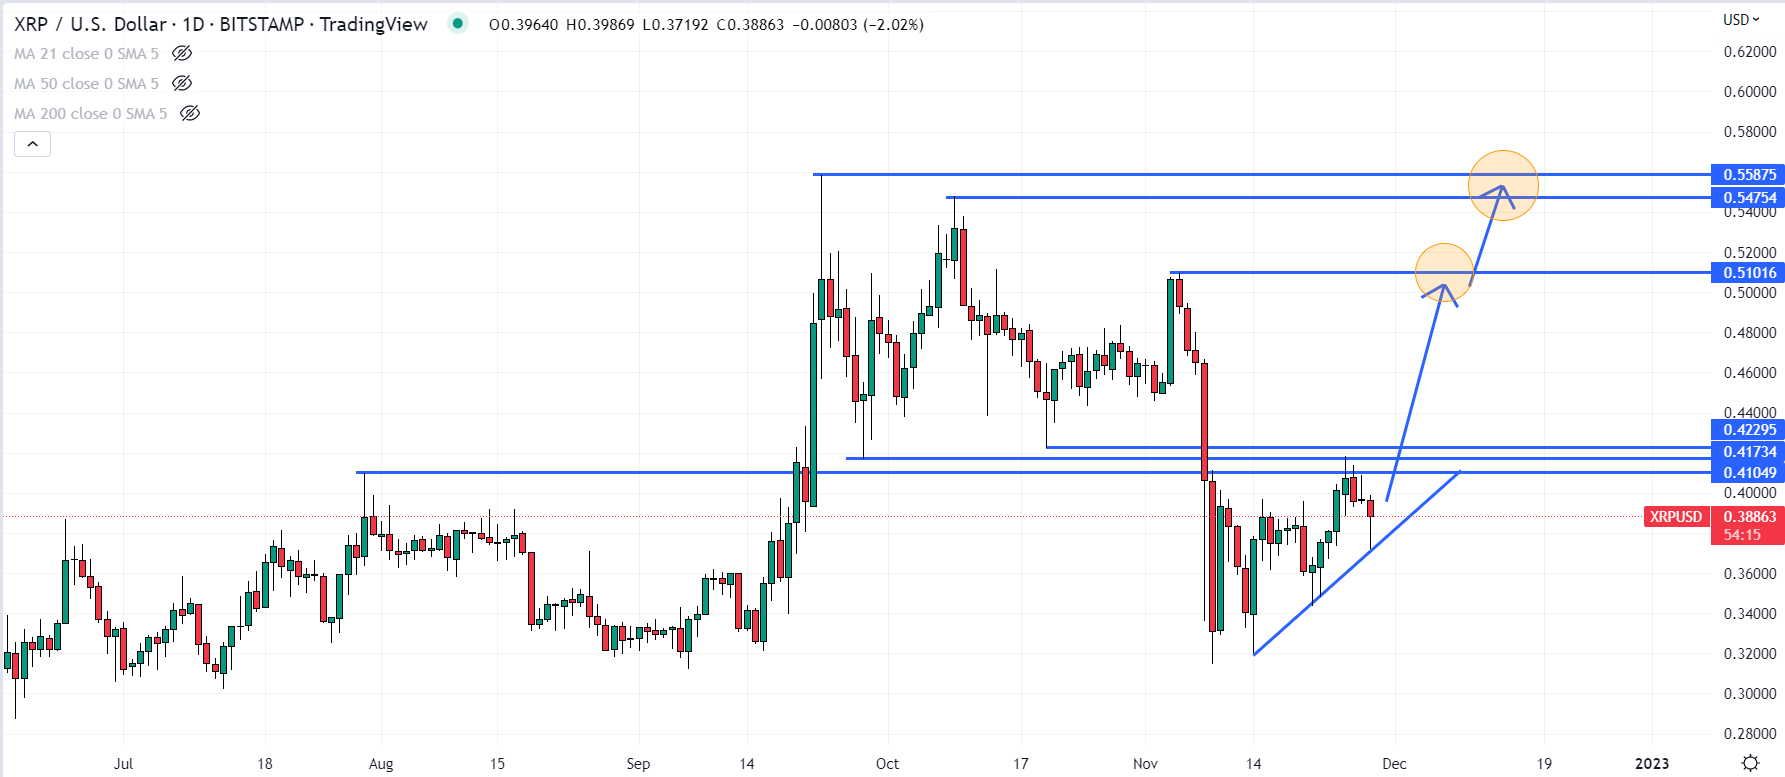 XRP/USD could move towards $0.50 if it breaks through the $0.42 resistance.  Source: TradingView